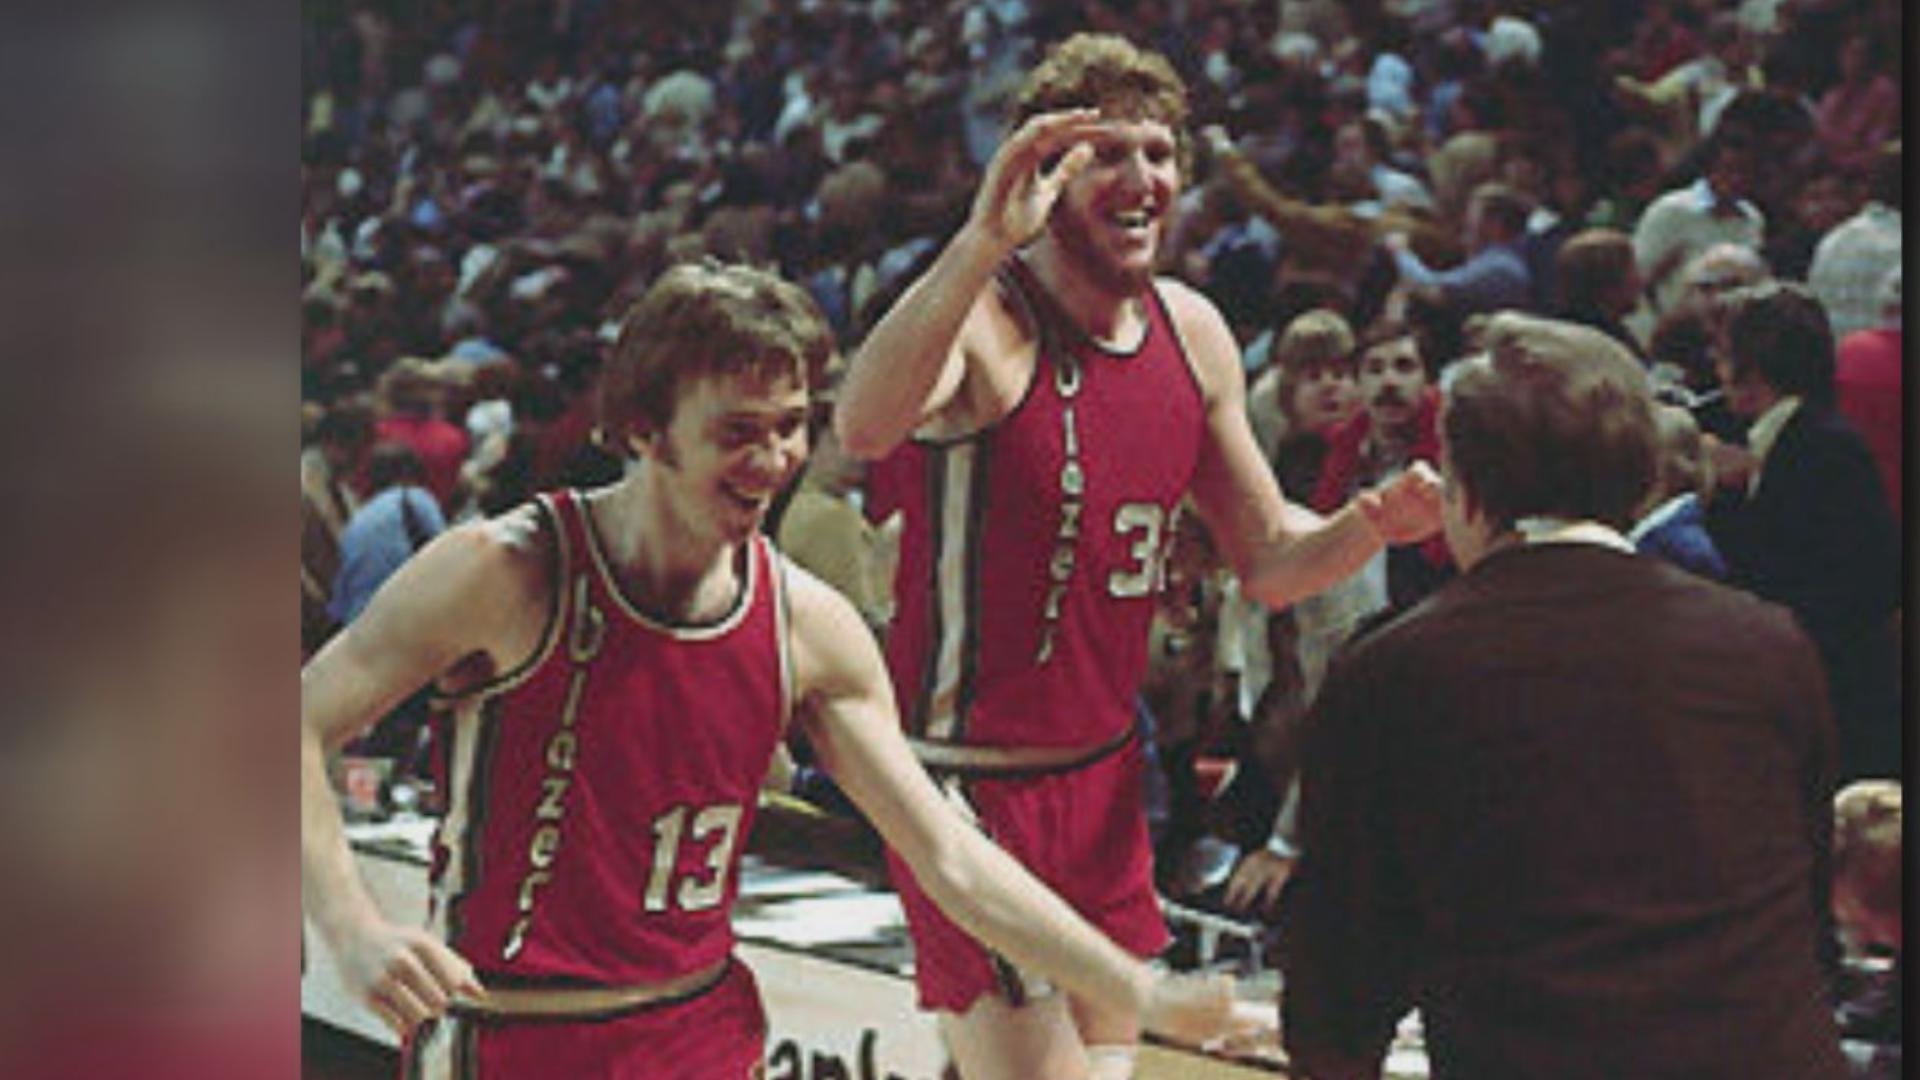 The two won an NBA title in Portland back in 1977.